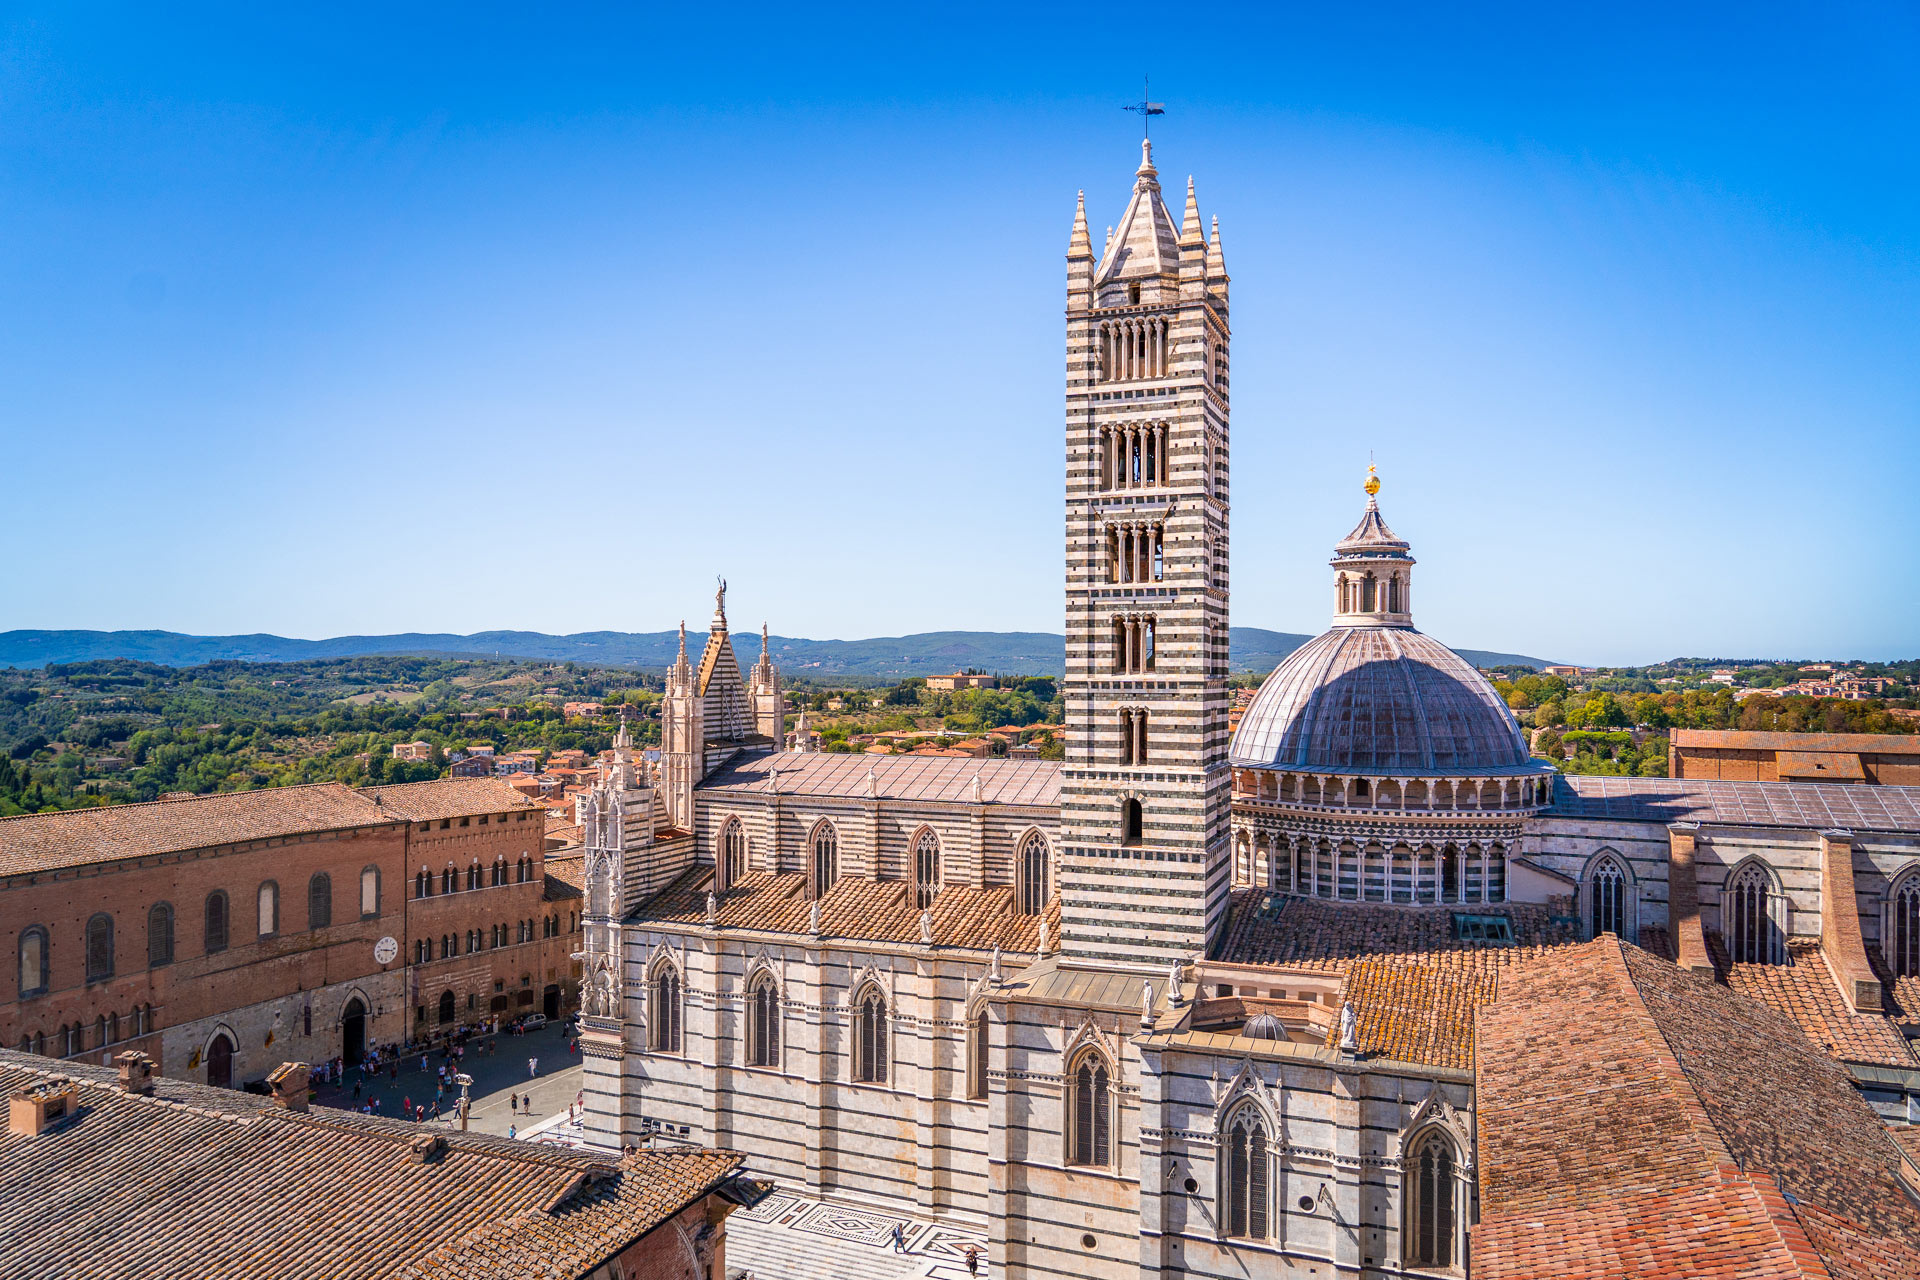 Top Siena attractions, Travel tips, Must-see sites, 2022 guide, 1920x1280 HD Desktop